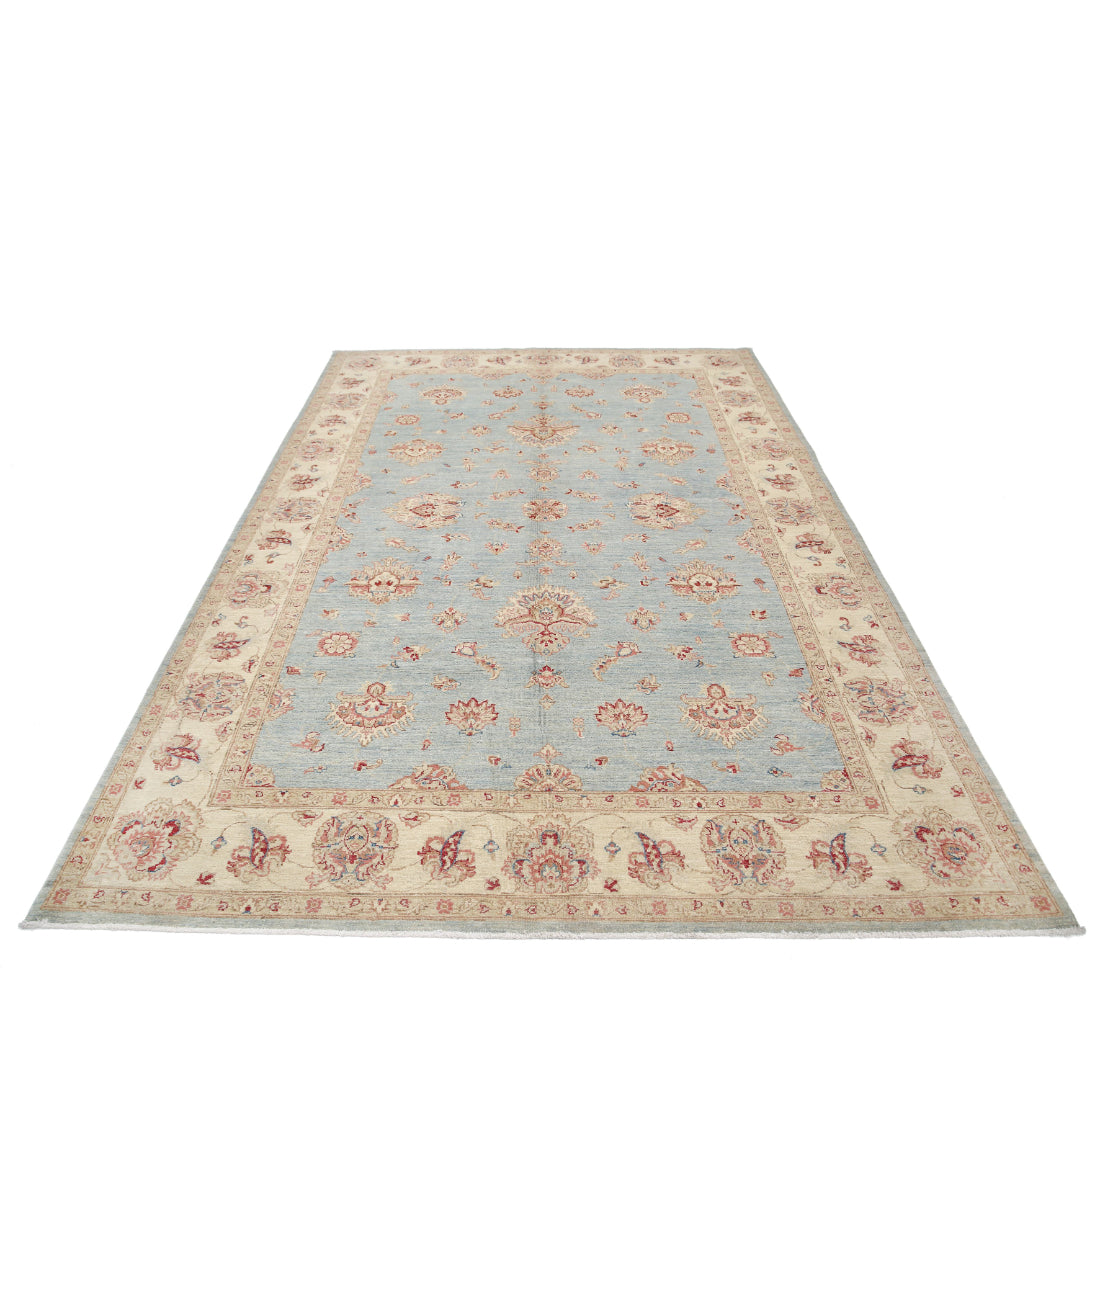 Ziegler 6'9'' X 9'8'' Hand-Knotted Wool Rug 6'9'' x 9'8'' (203 X 290) / Blue / Ivory